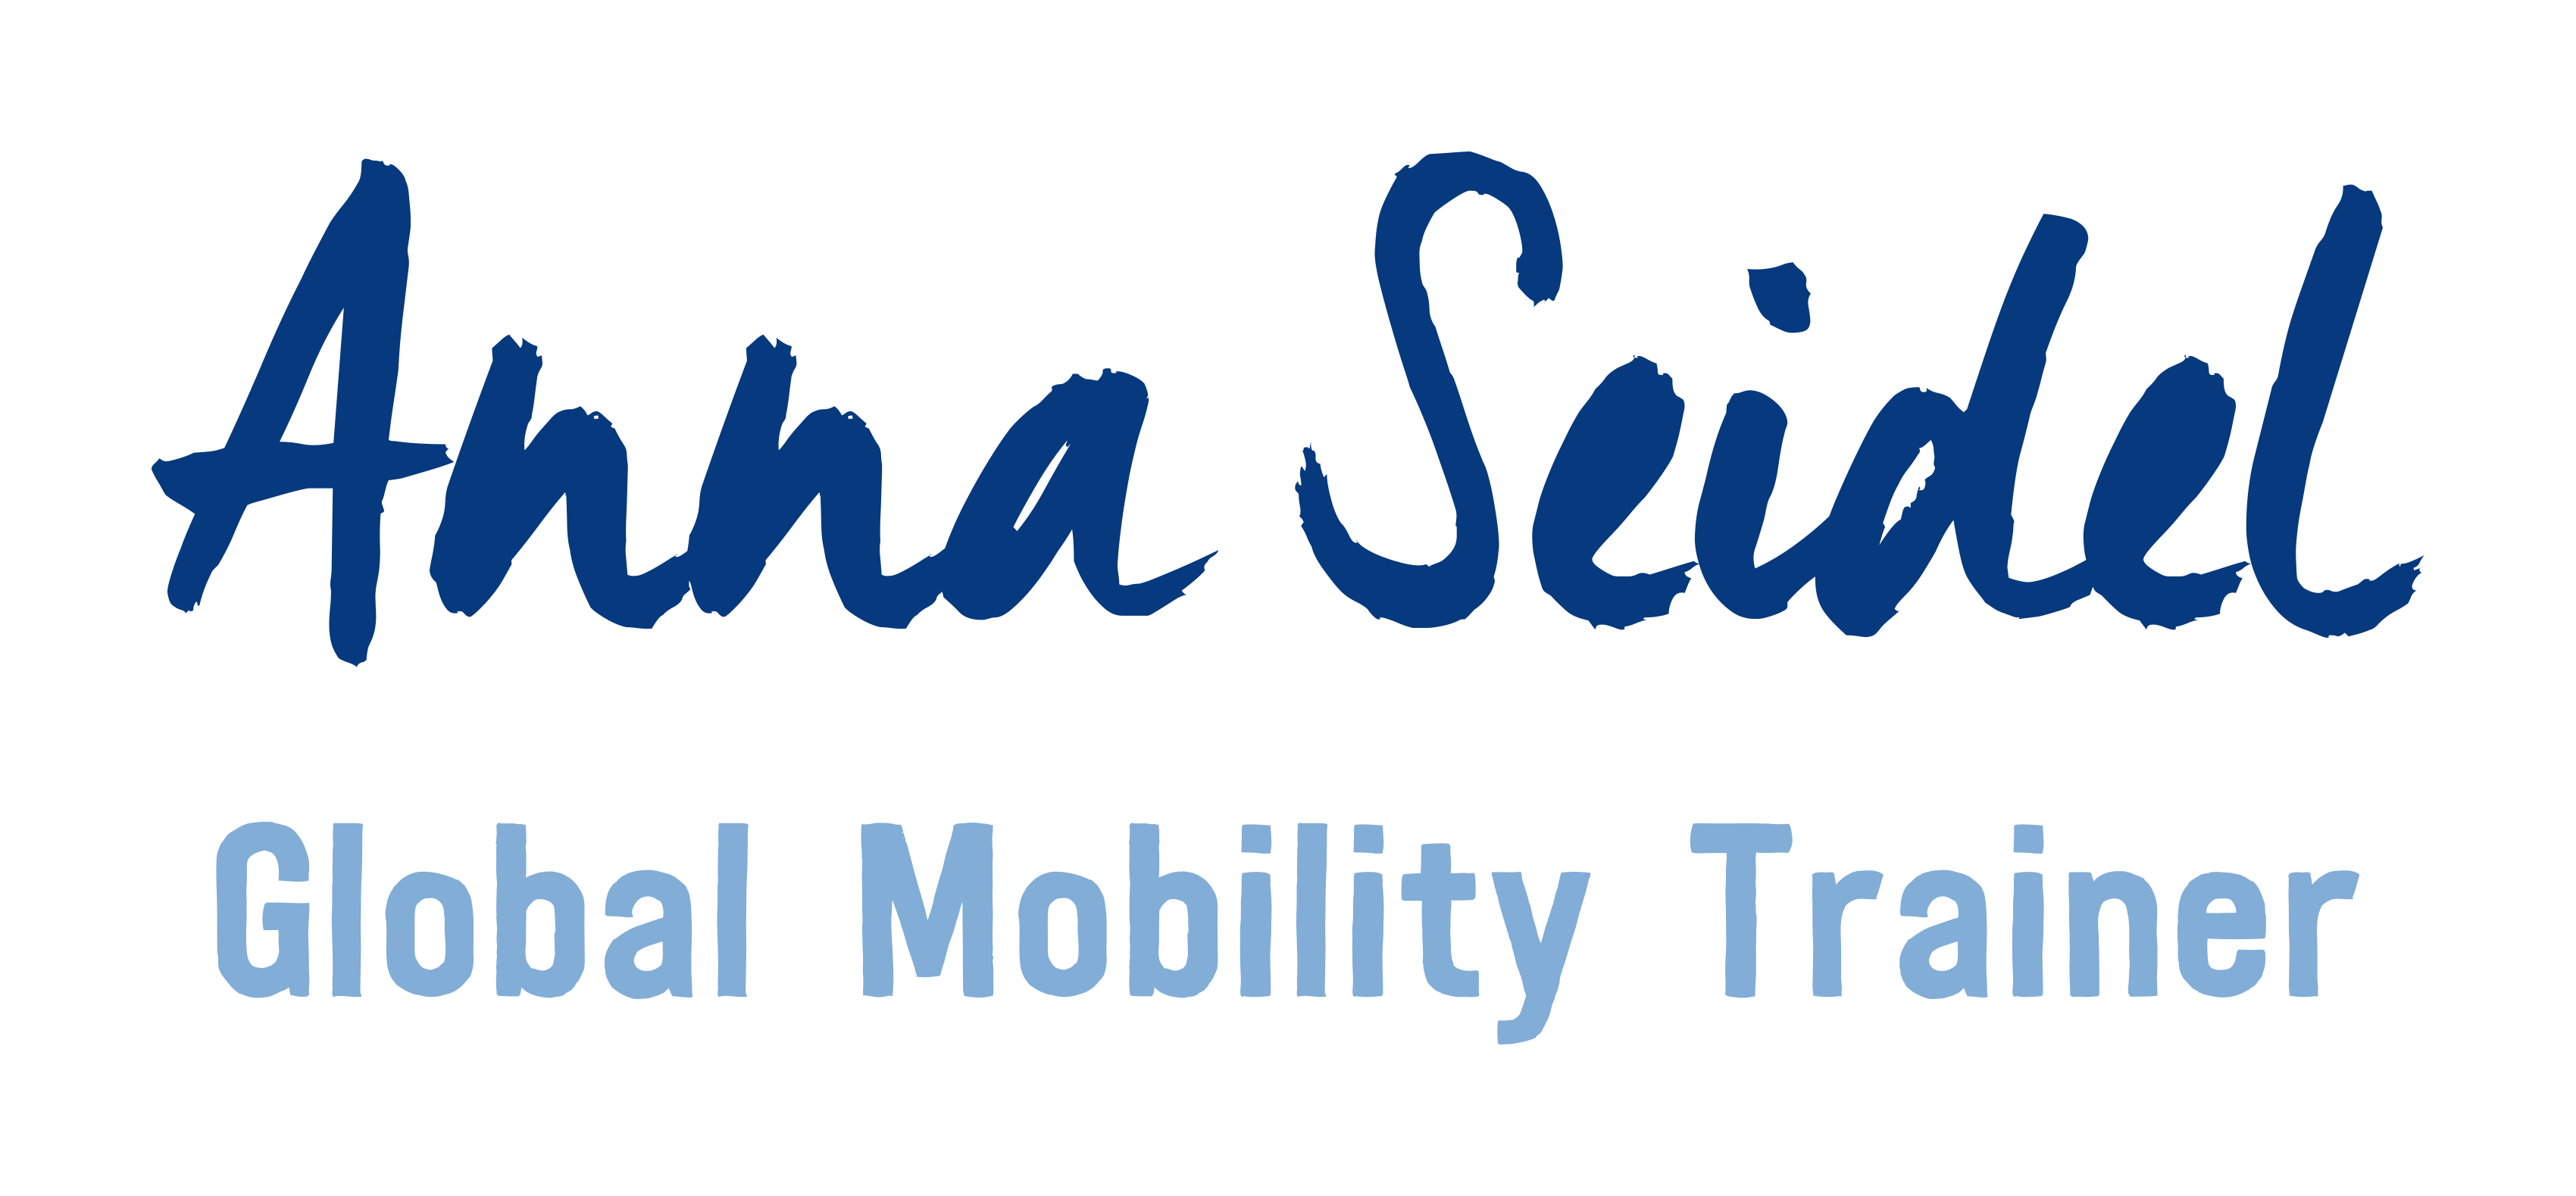 Anna Seidel – Global Mobility Trainer